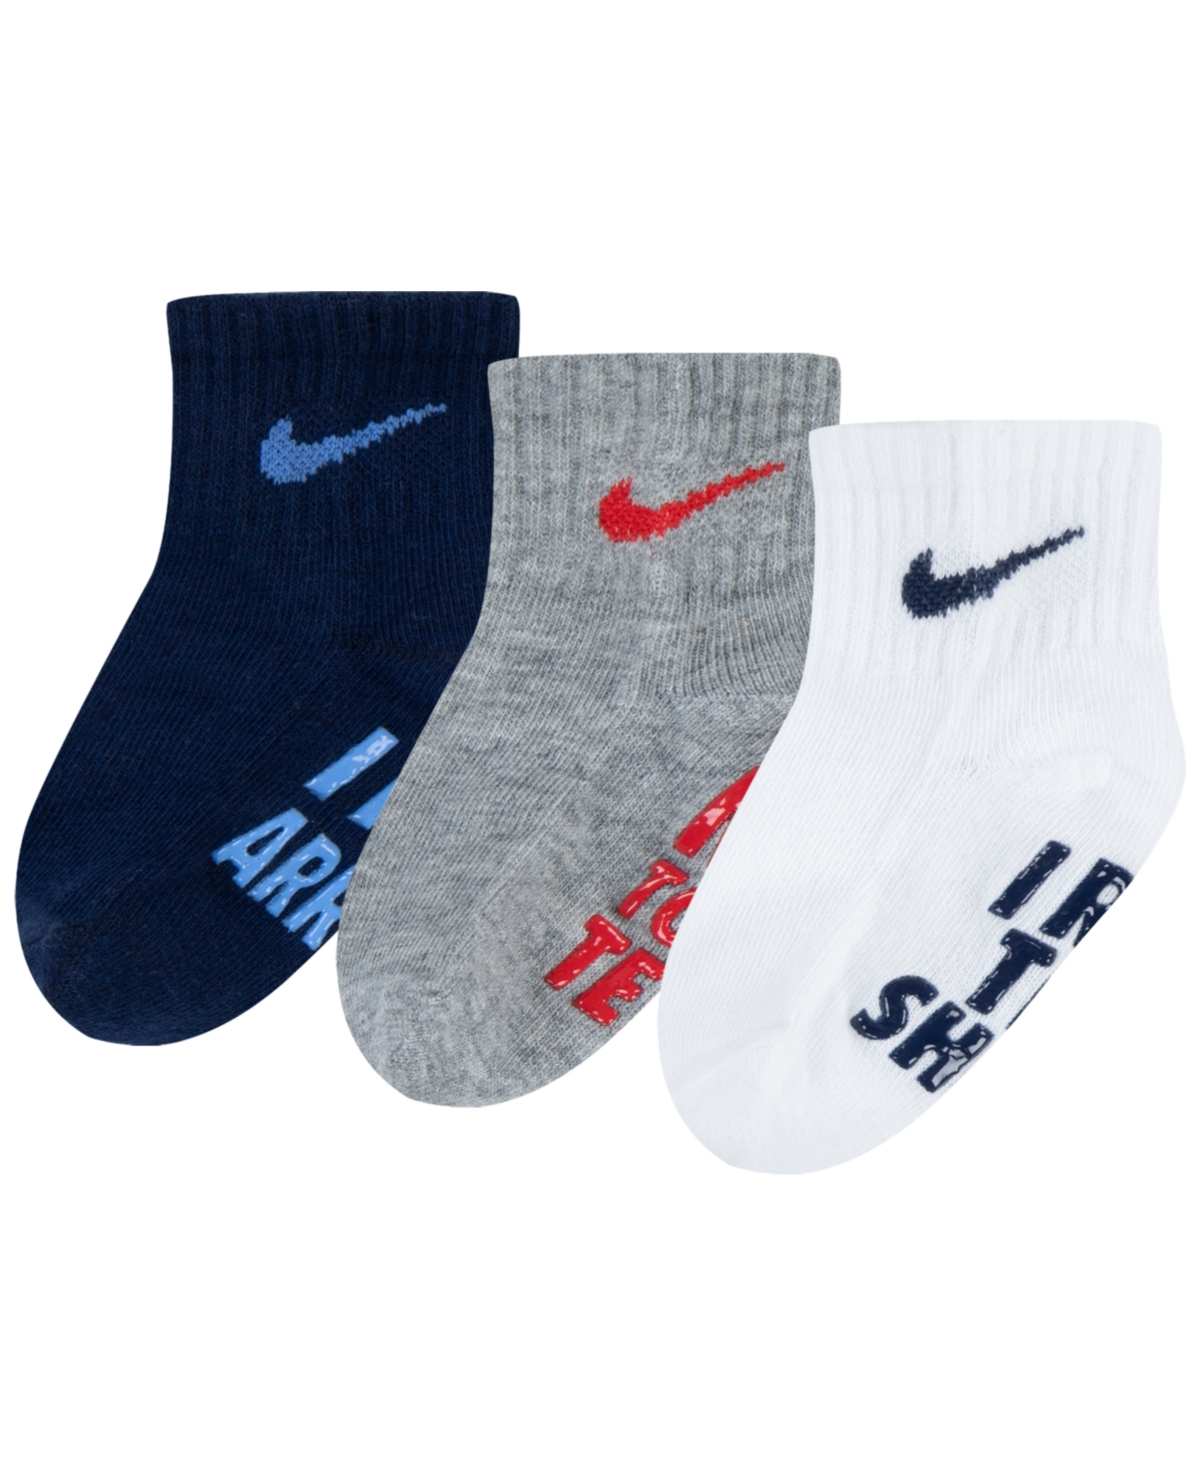 Nike Baby Boys Or Girls Verbiage Gripper Cotton Socks, Pack Of 3 In Midnight Navy